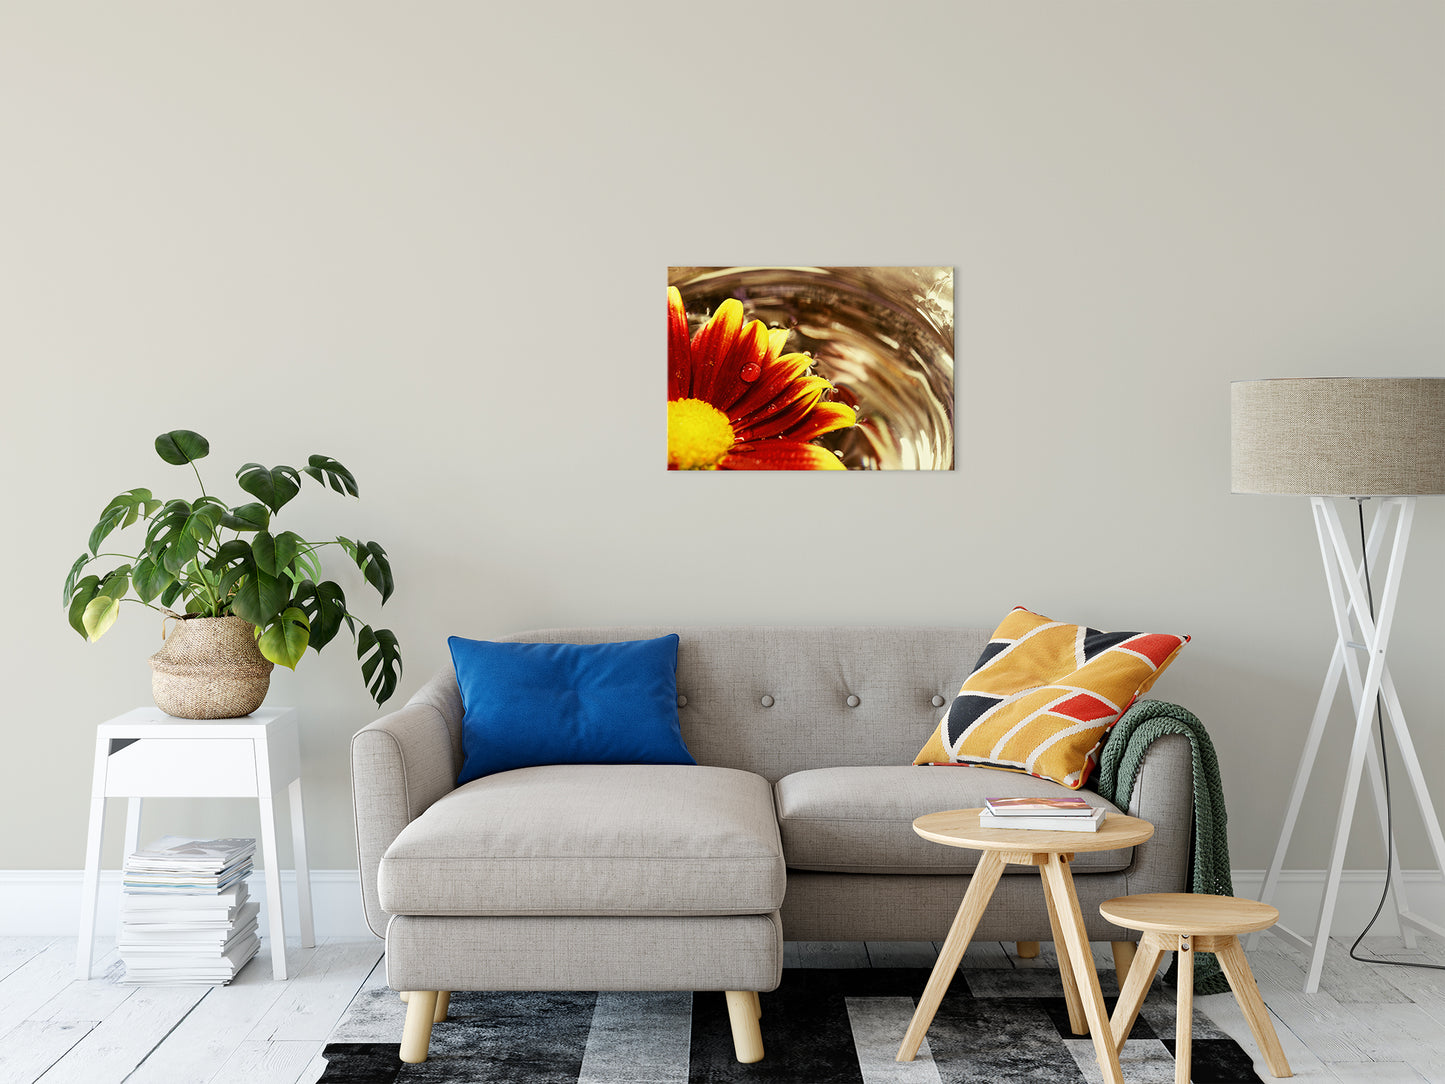 Floating Mum Nature / Floral Photo Fine Art Canvas Wall Art Prints 20" x 30" - PIPAFINEART